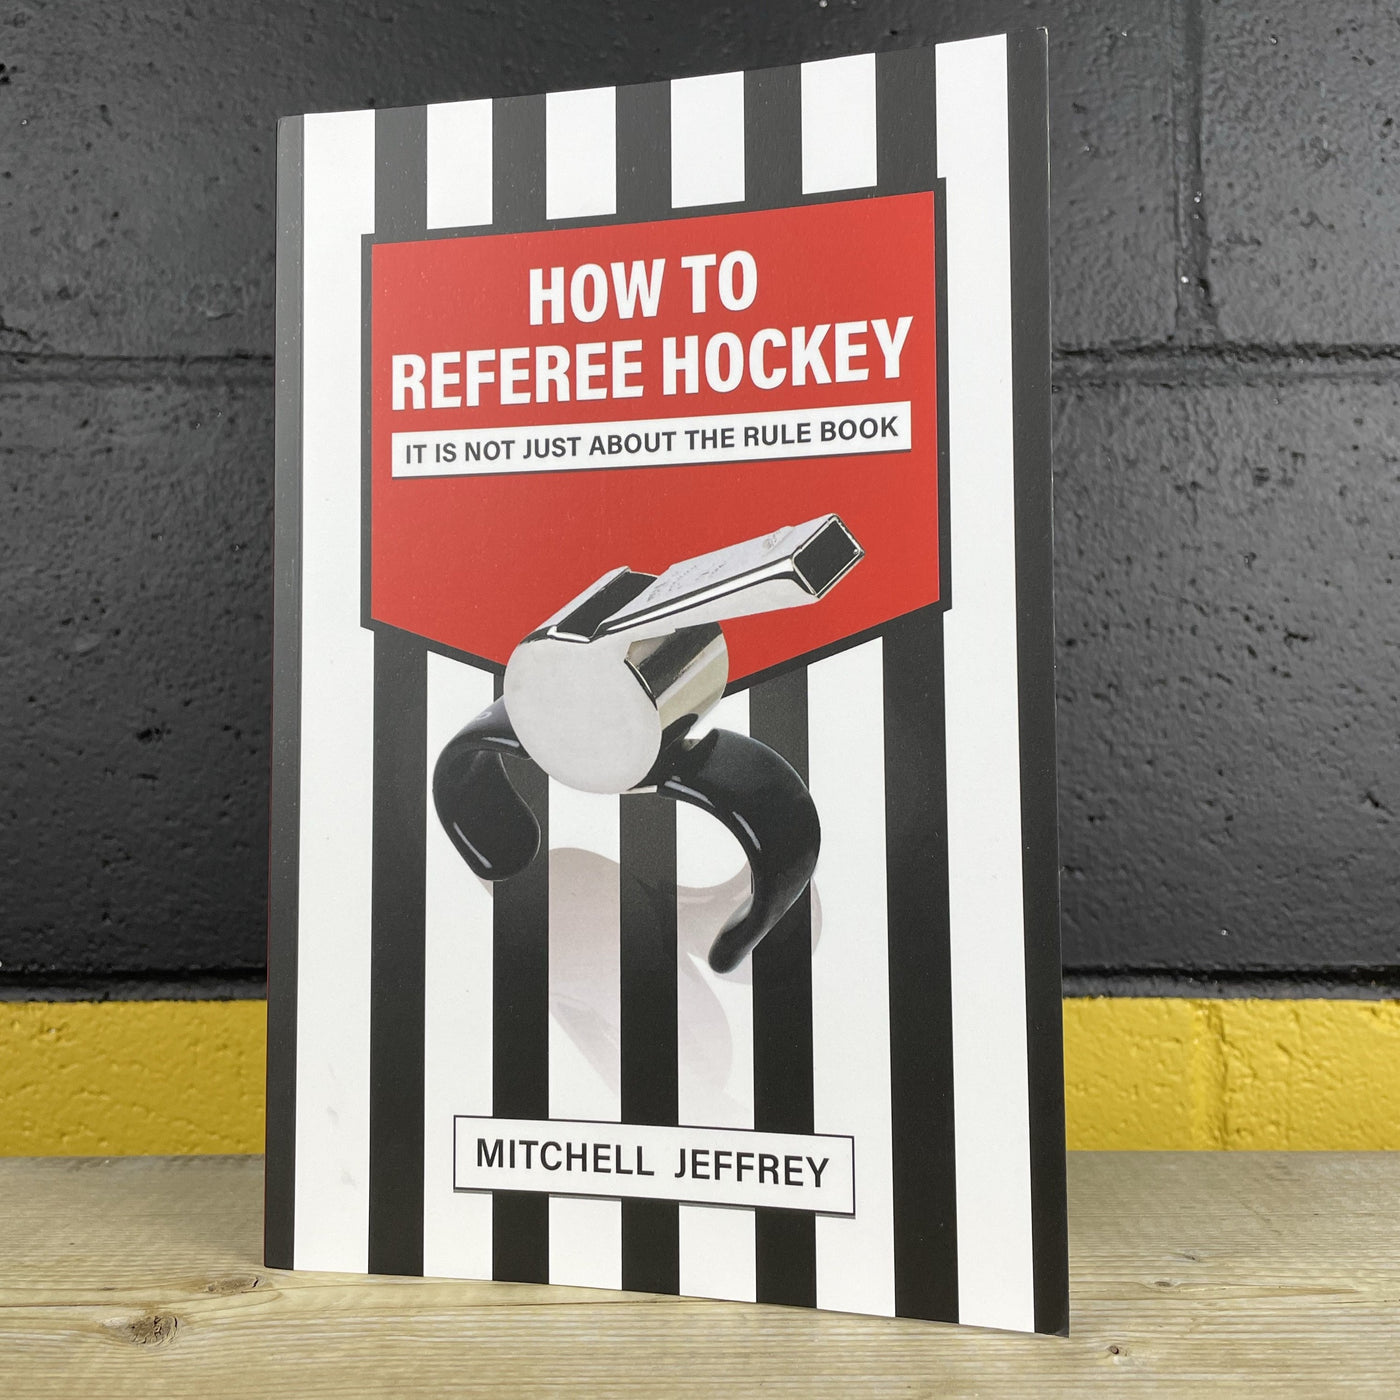 the book - How to referee hockey by Mitchell Jerffrey, front page